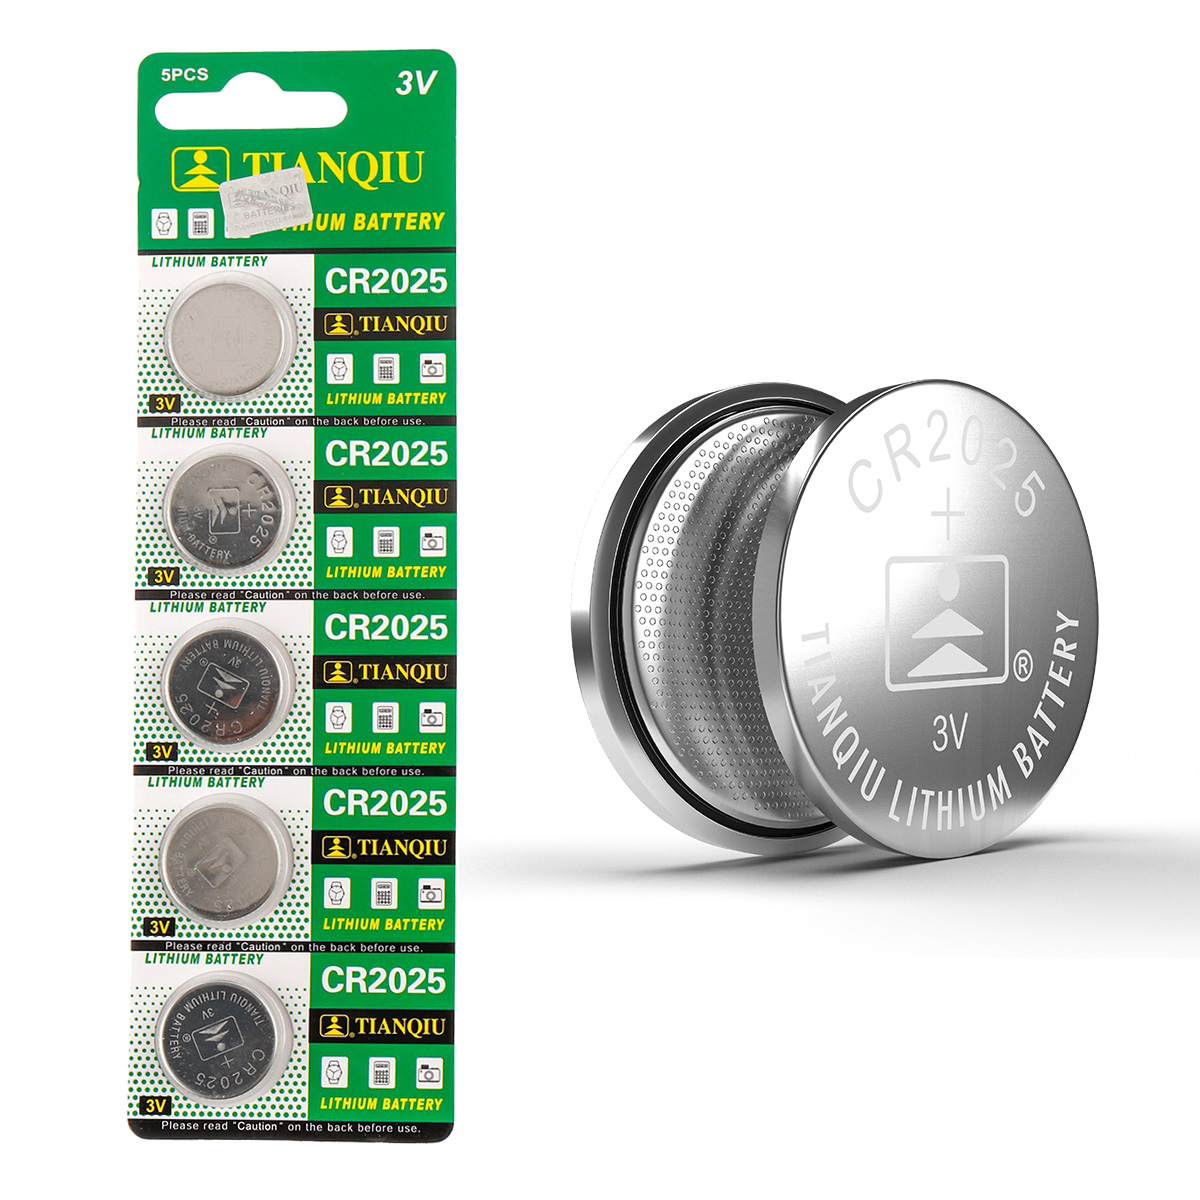 Maxell CR1616 Battery 3V Lithium Coin Cell (1PC)